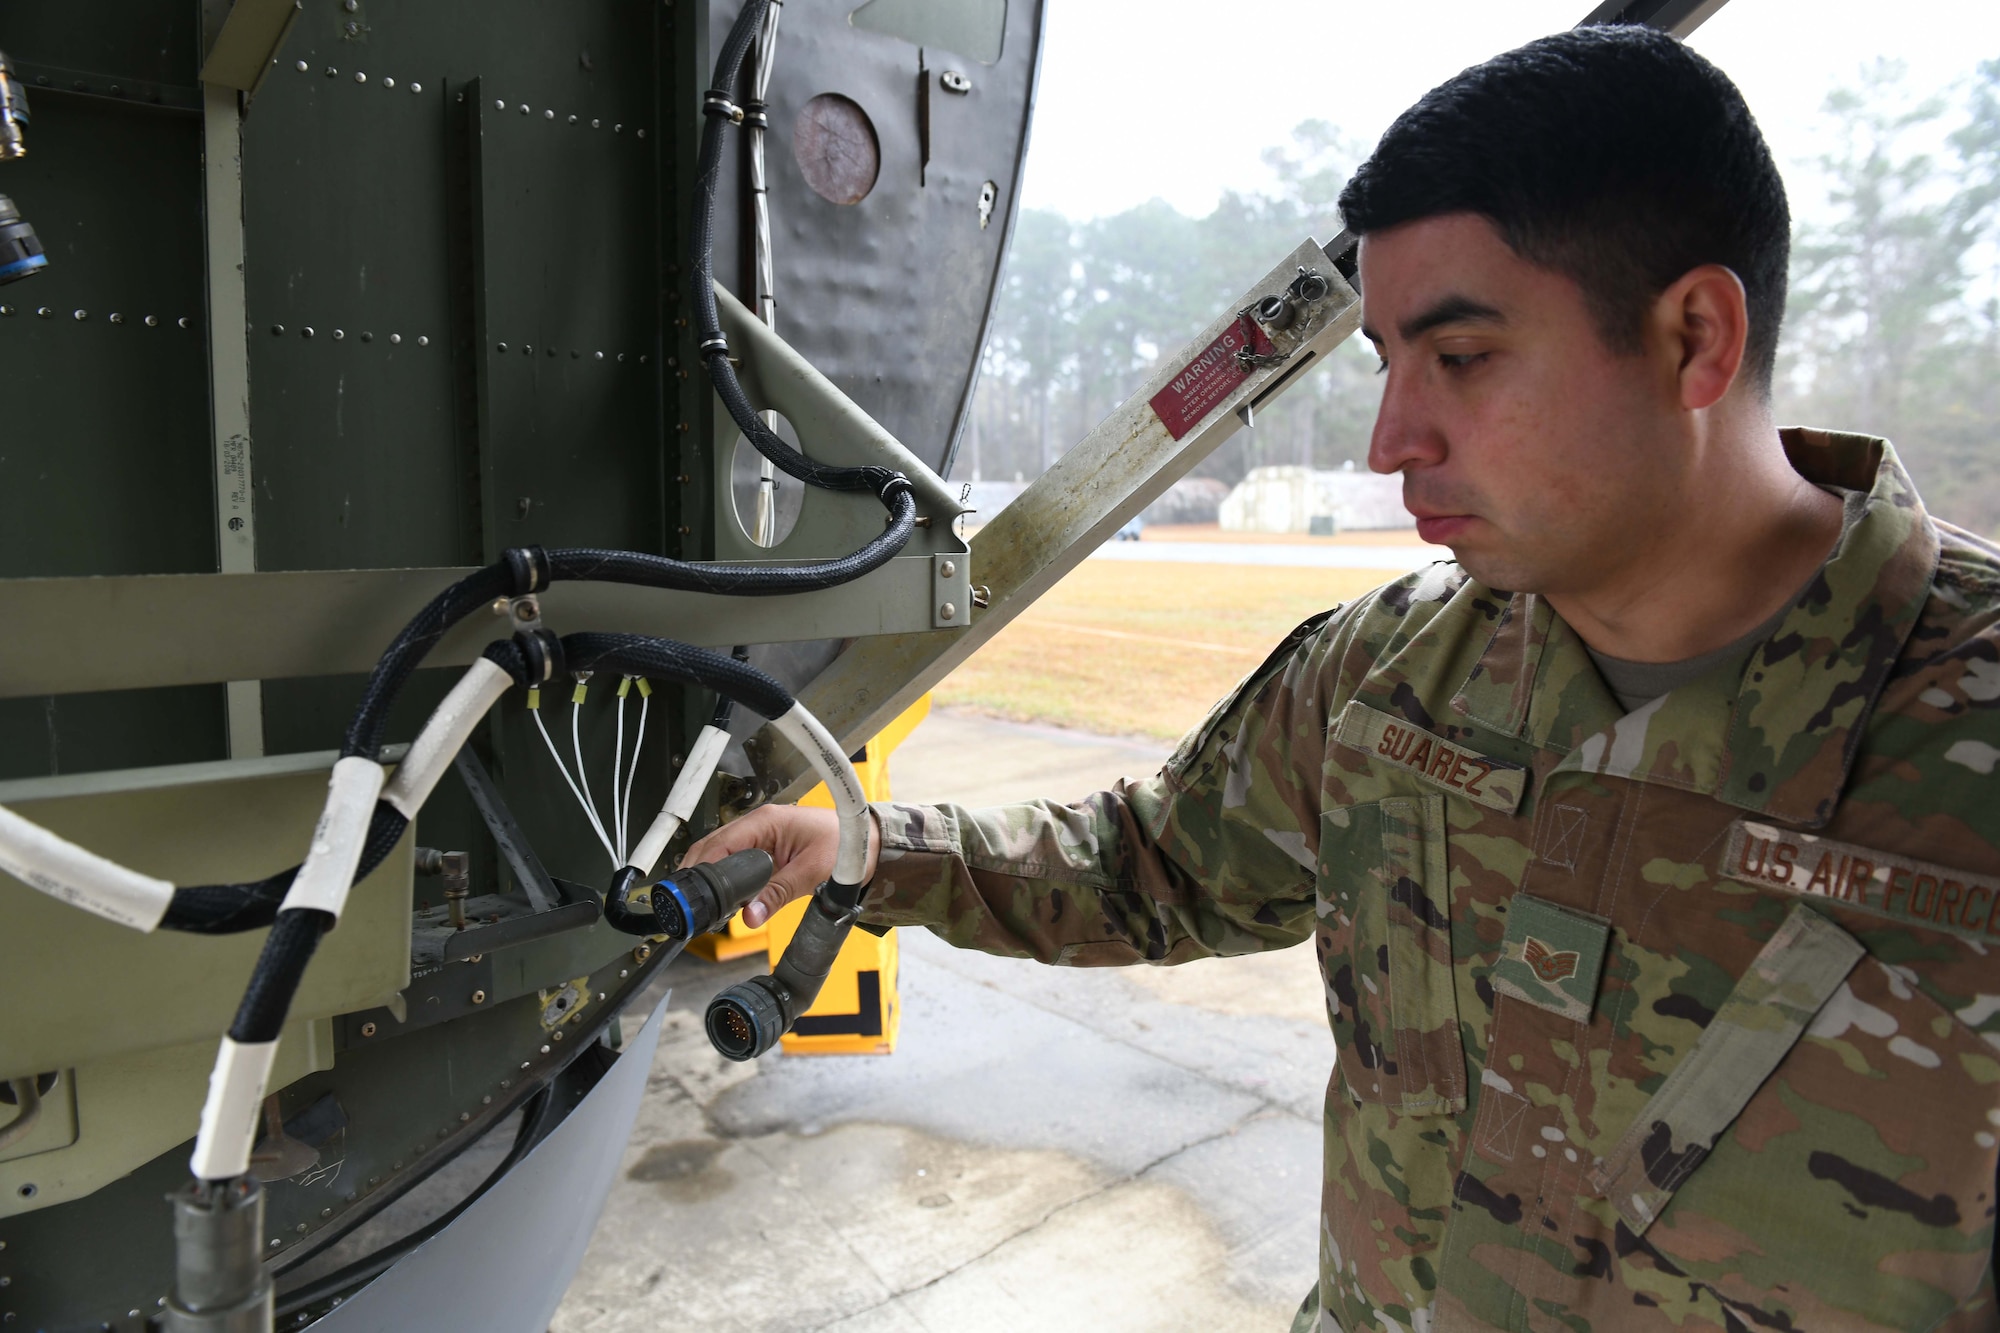 Military person inspecting a wire